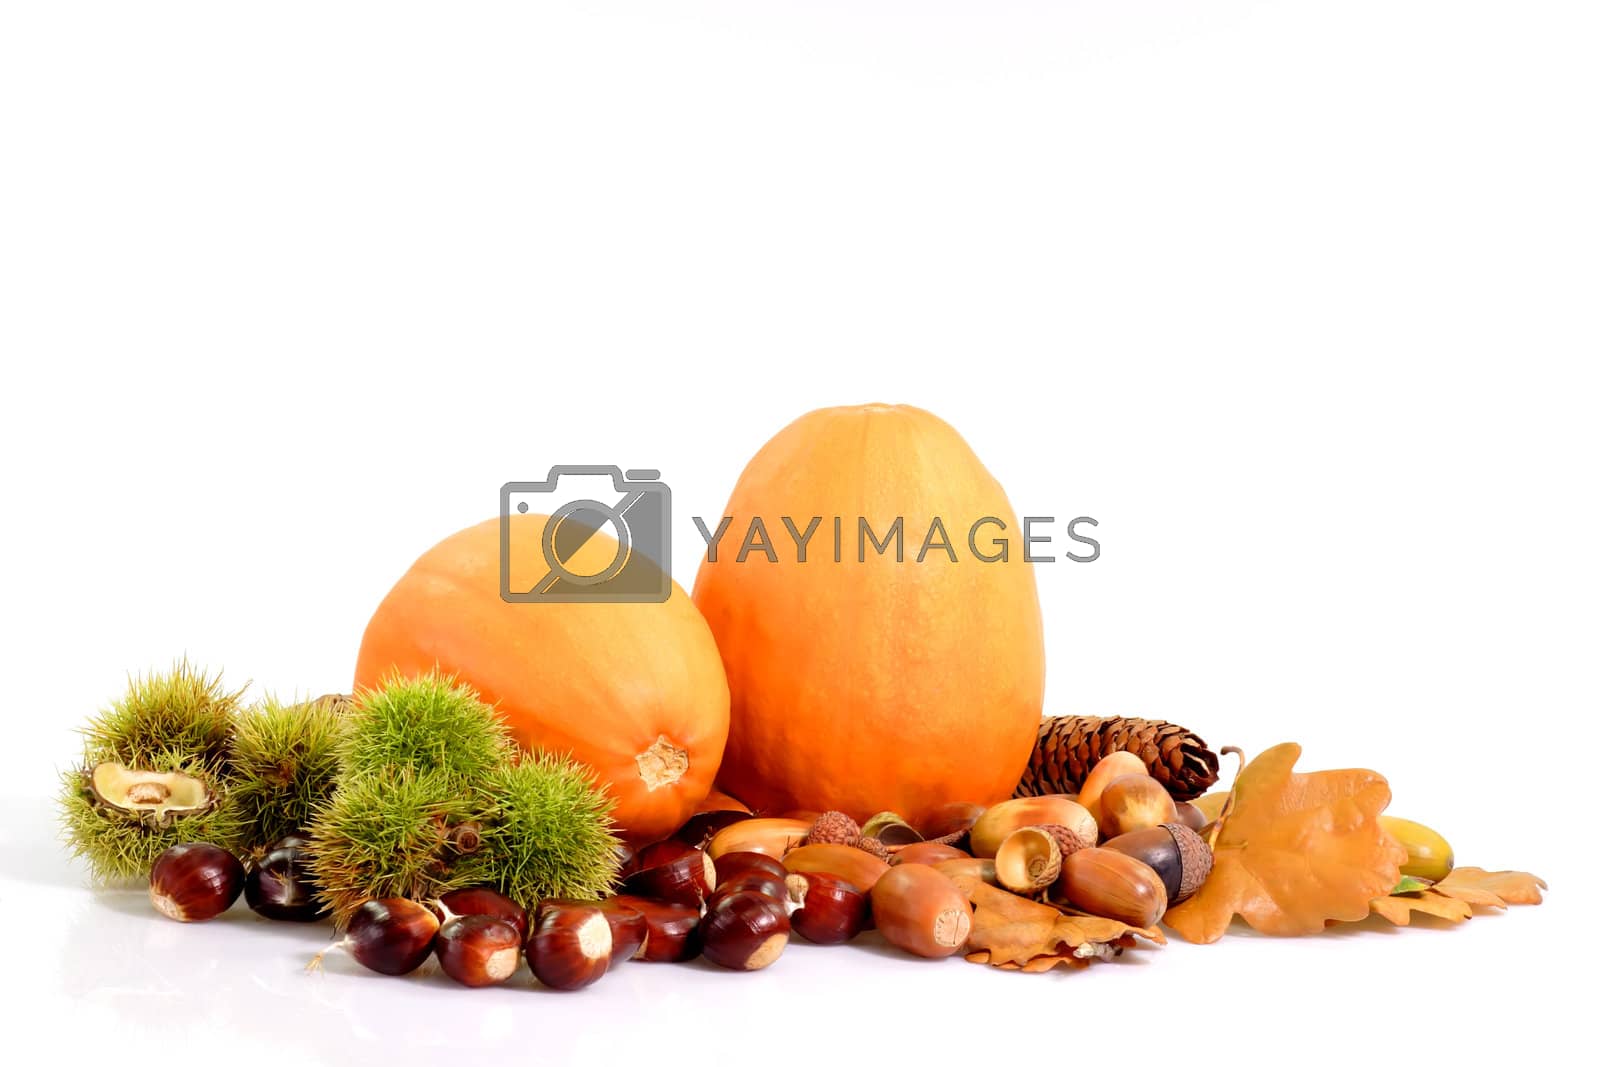 Royalty free image of Harvest Decoration by Teamarbeit